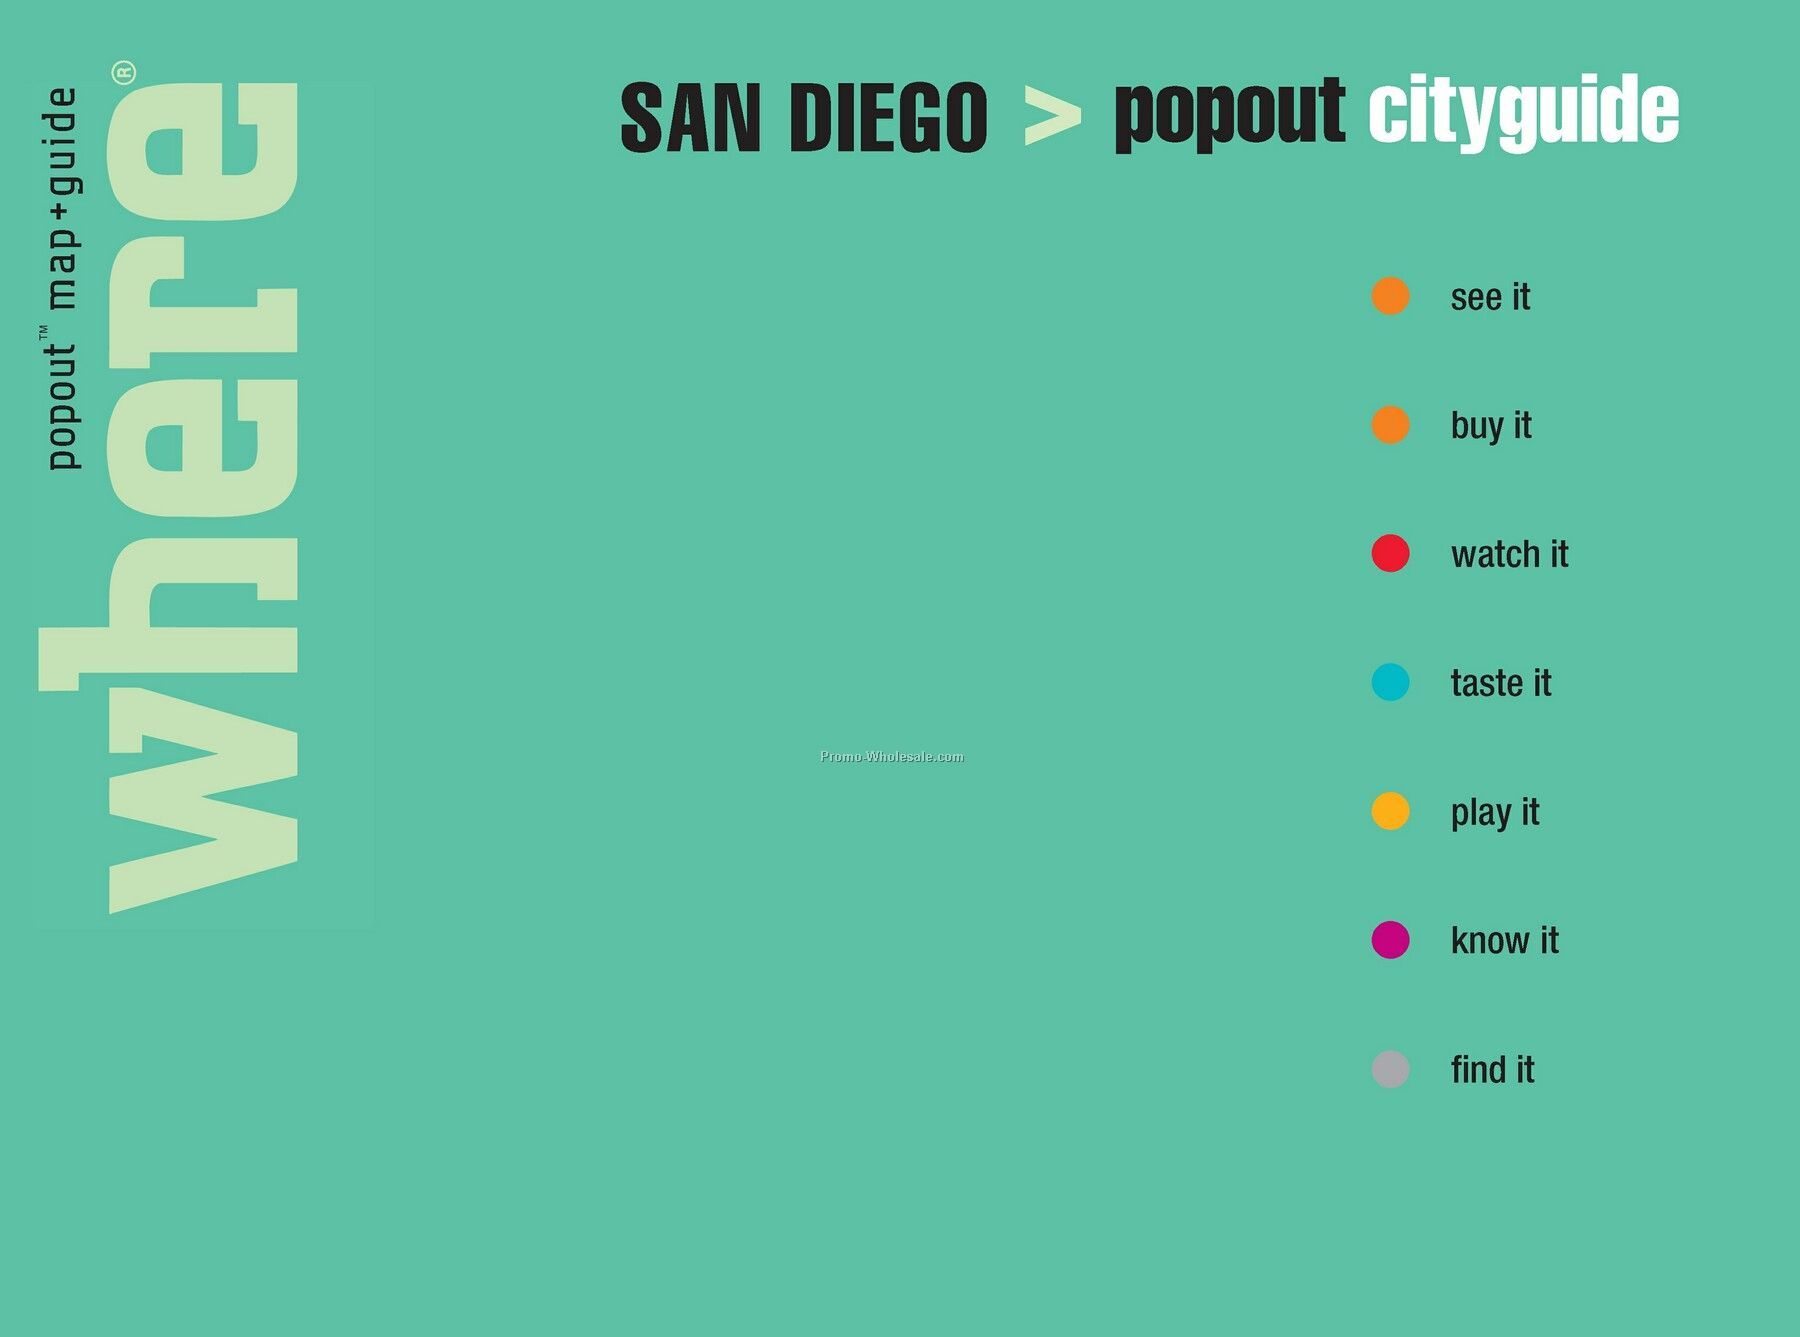 Travel Guides - City Guide Of San Diego - Featuring Popout Maps